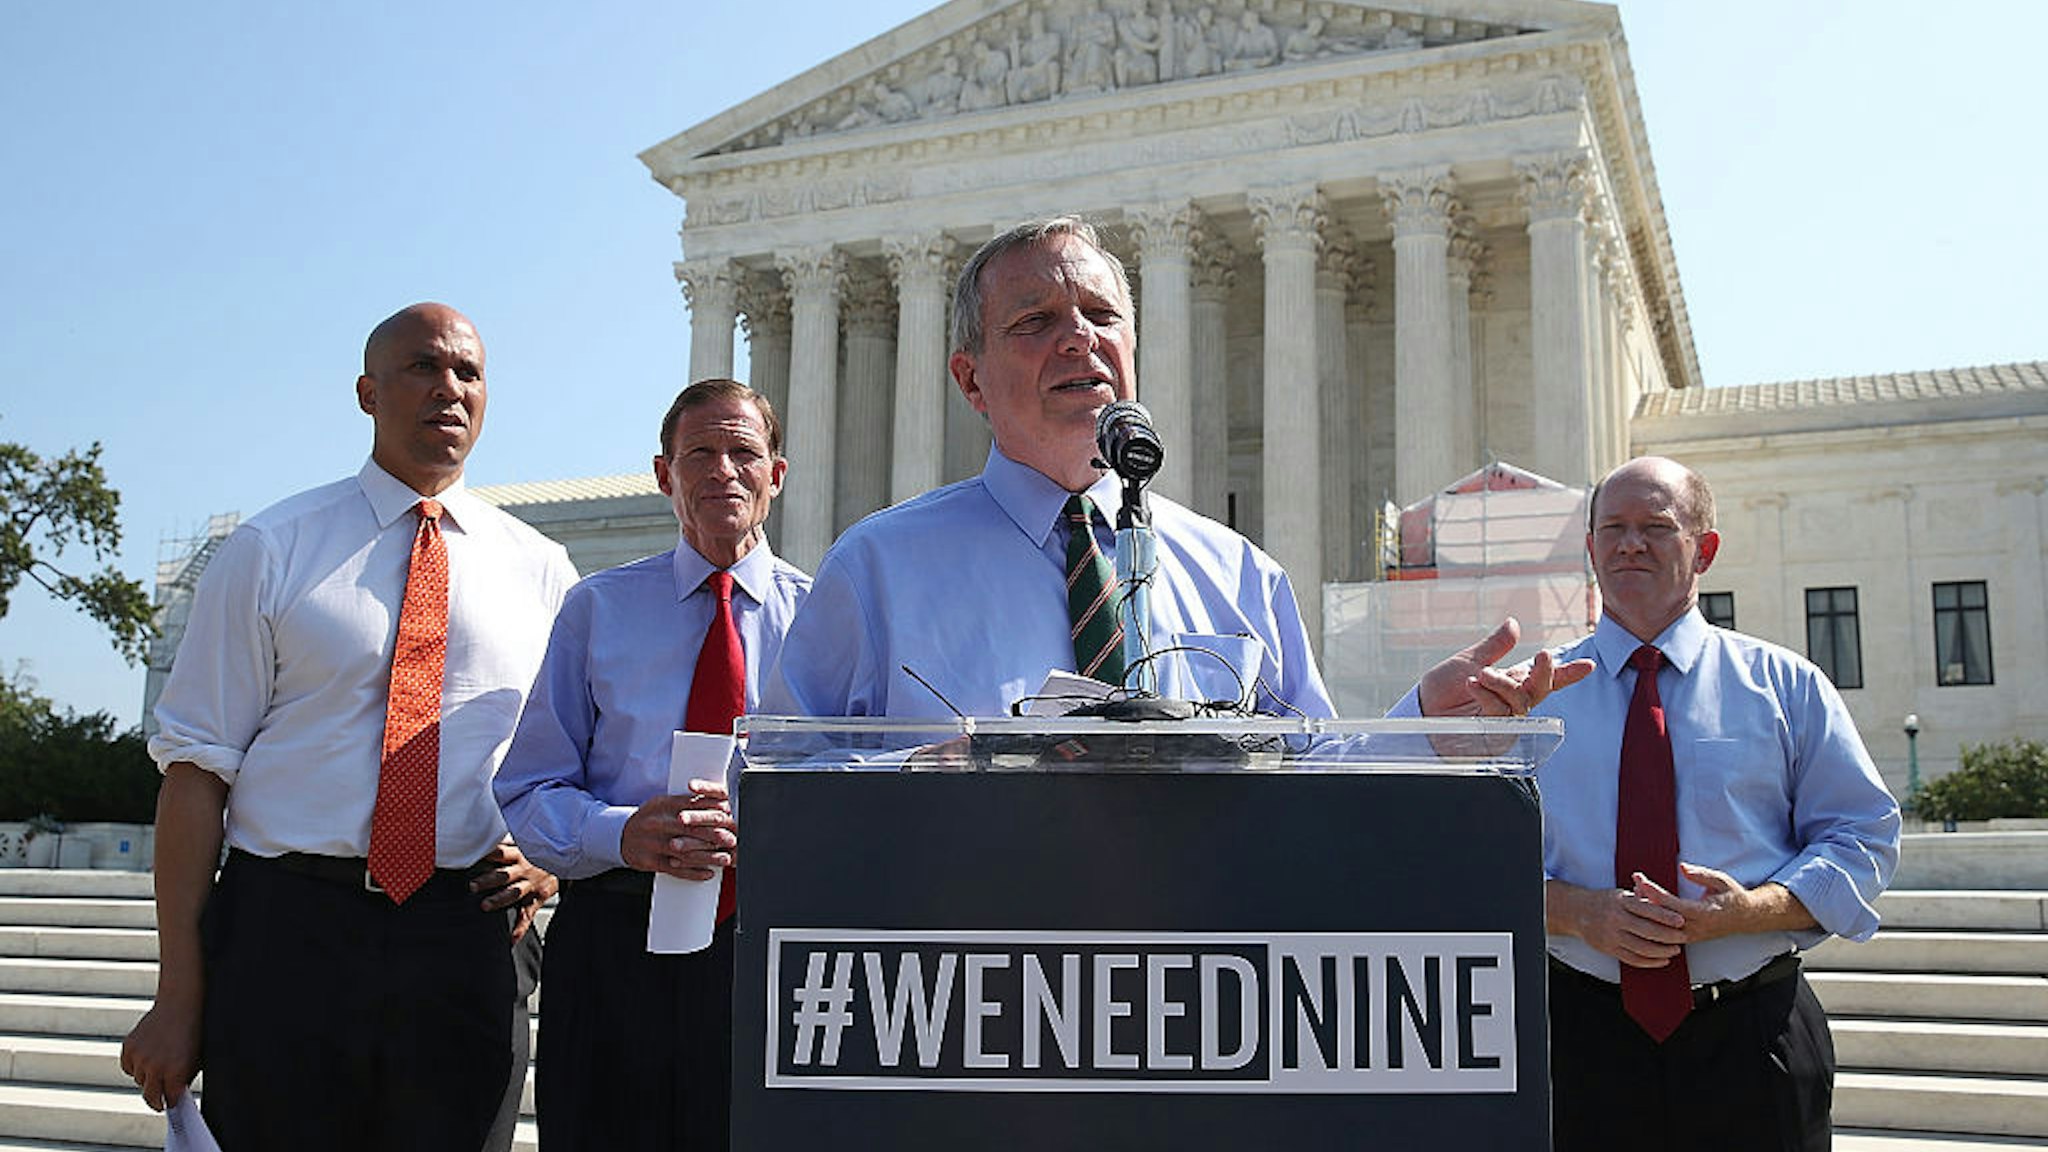 Sen. Dick Durbin (D-IL), (C), calls for Senate Judiciary conformation hearings for Supreme Court nominee Merrick Garland, during a news conference news conference in front of the US Supreme Court, September 7, 2016 in Washington, DC.